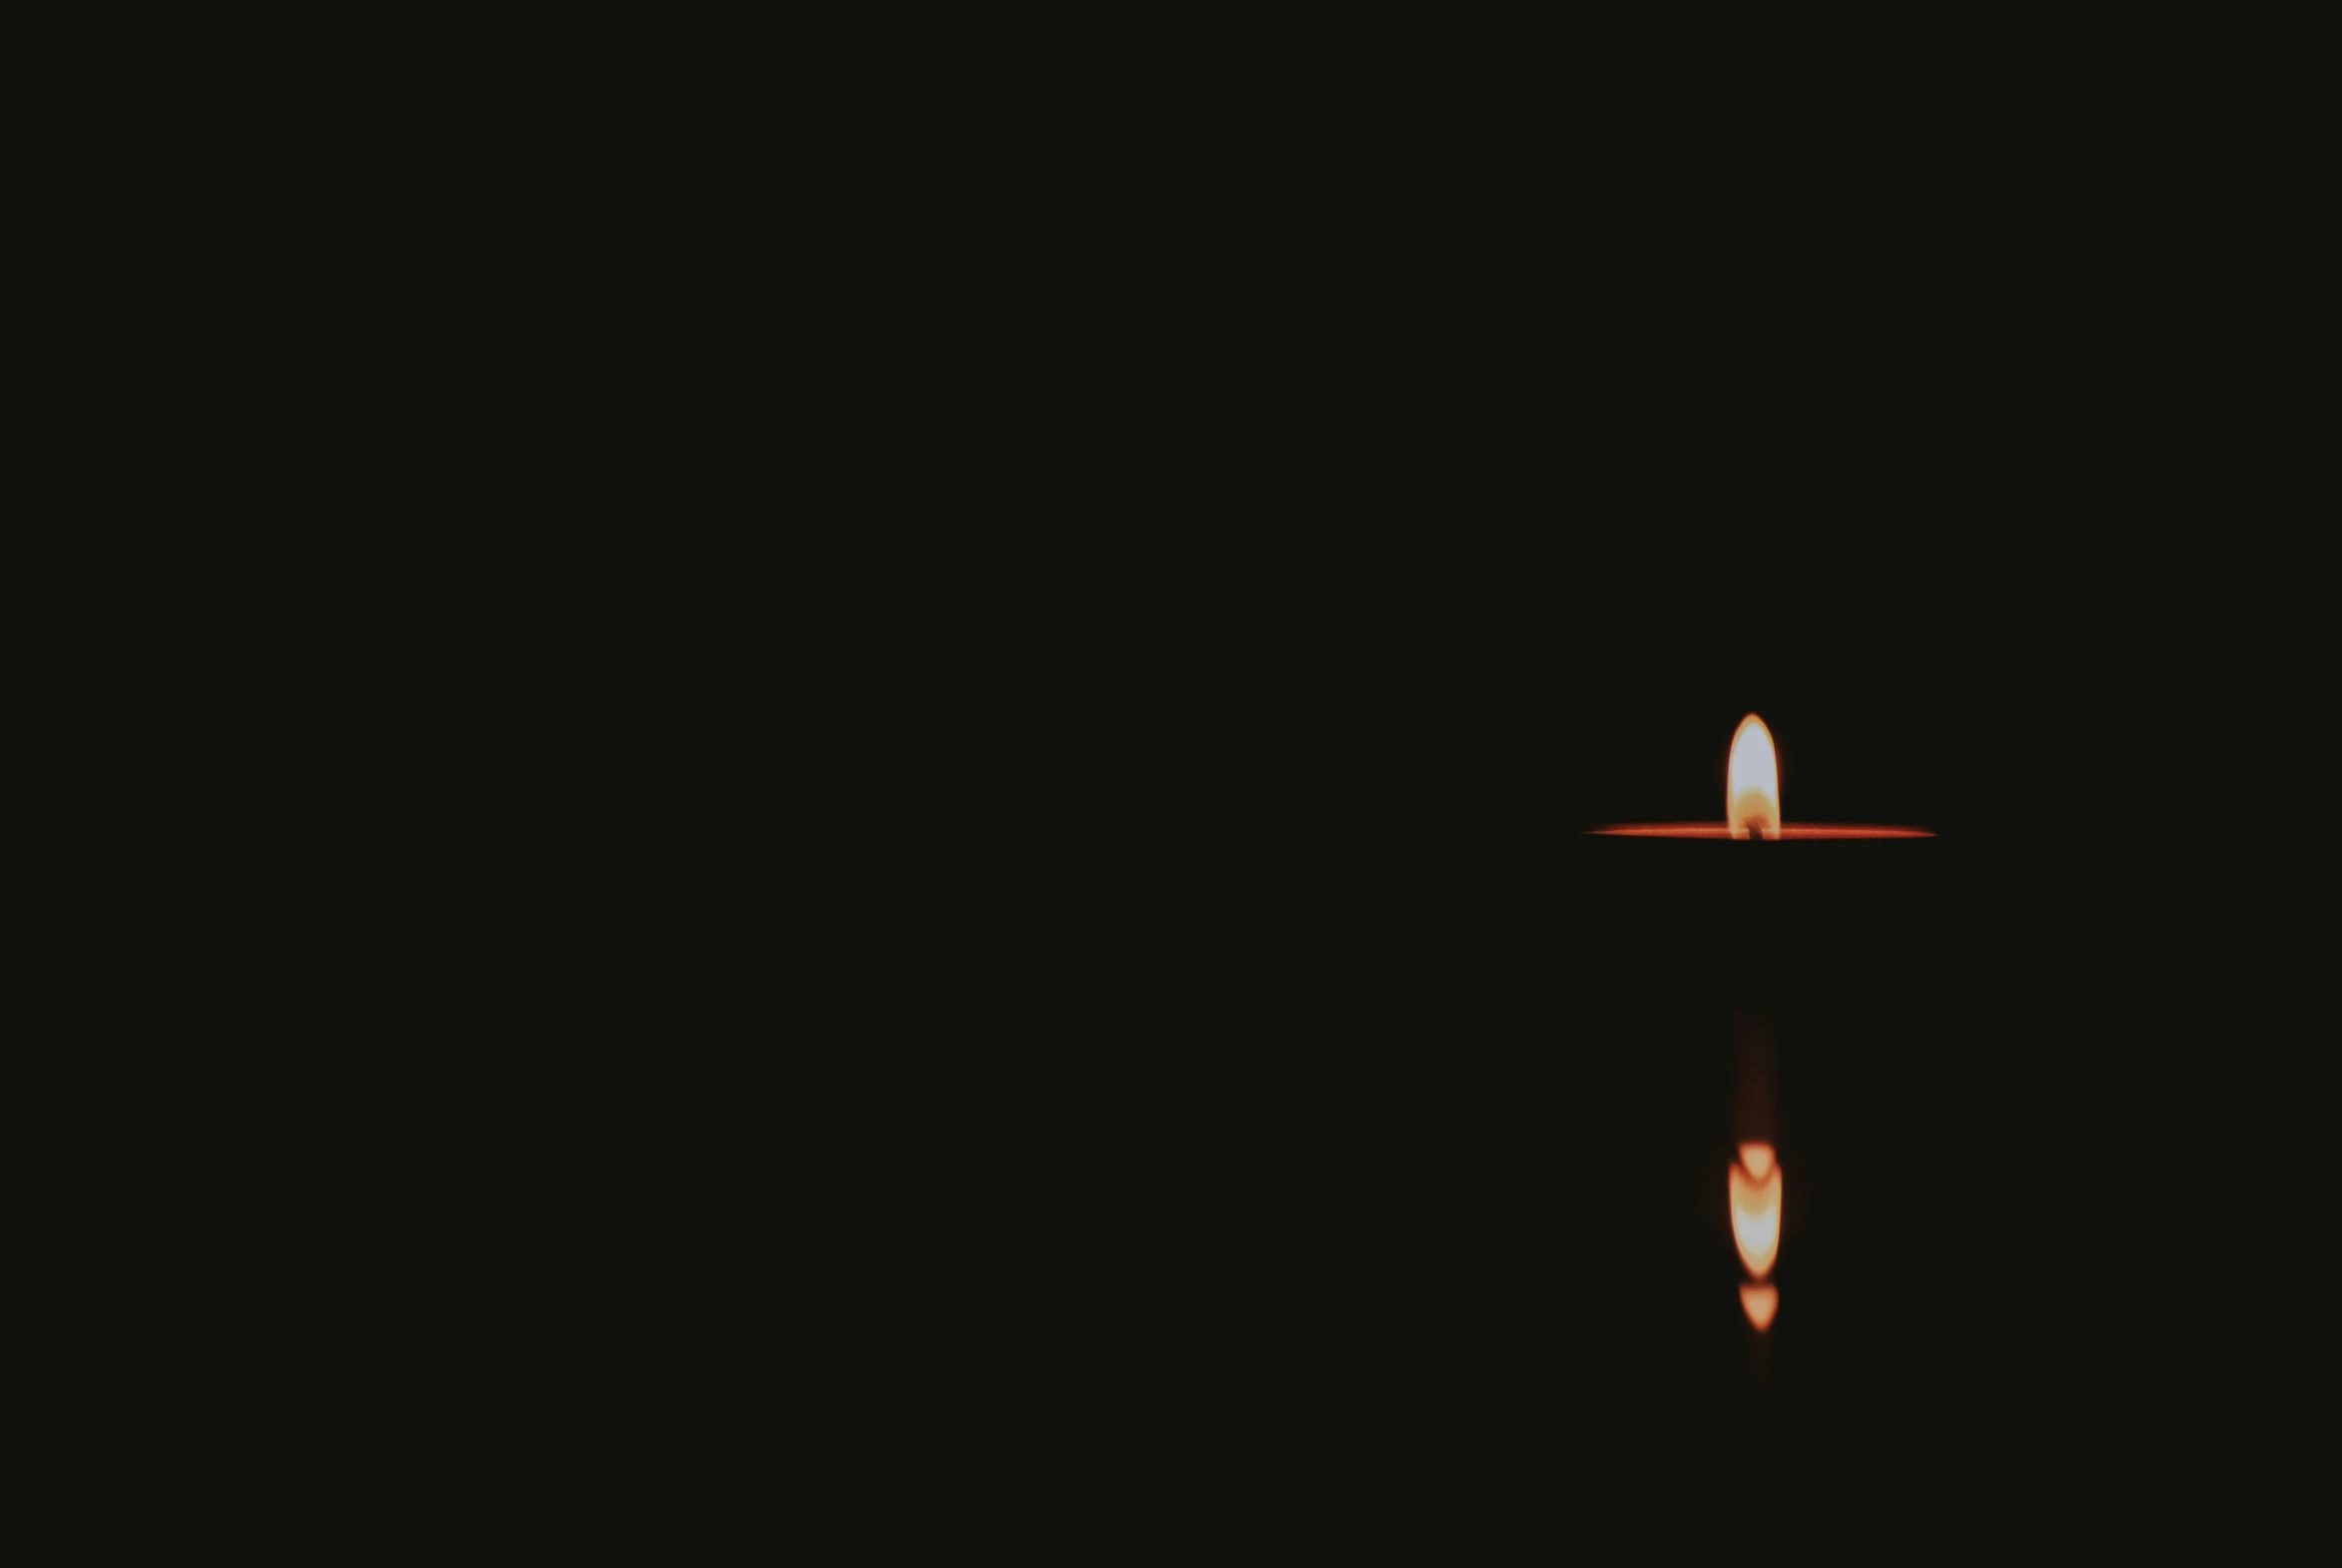 an odd looking picture of the candle on the table in the dark